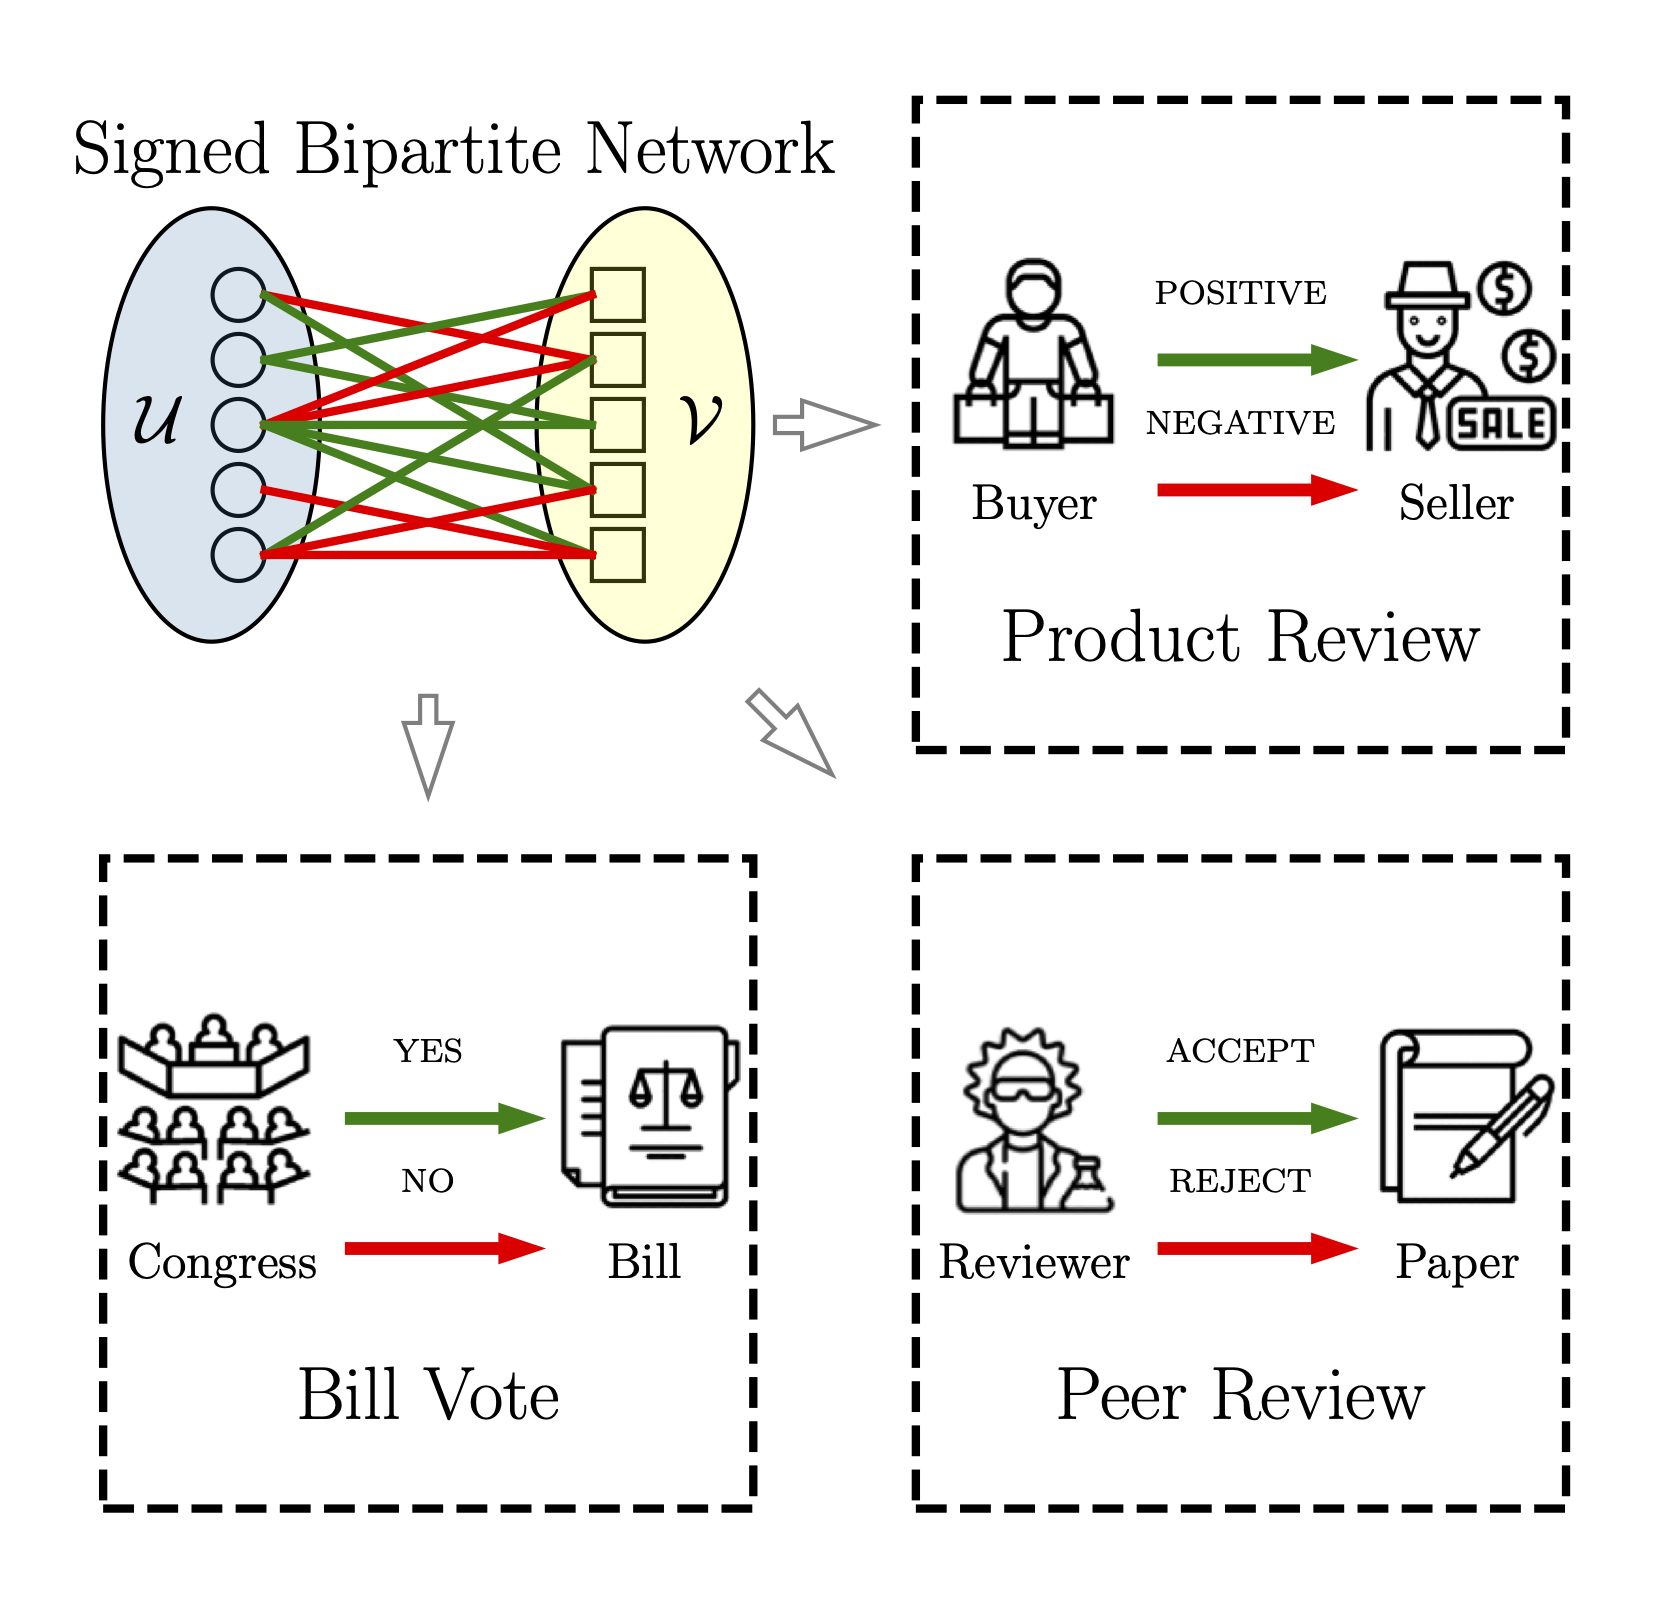 Common application scenarios for signed bipartite networks.